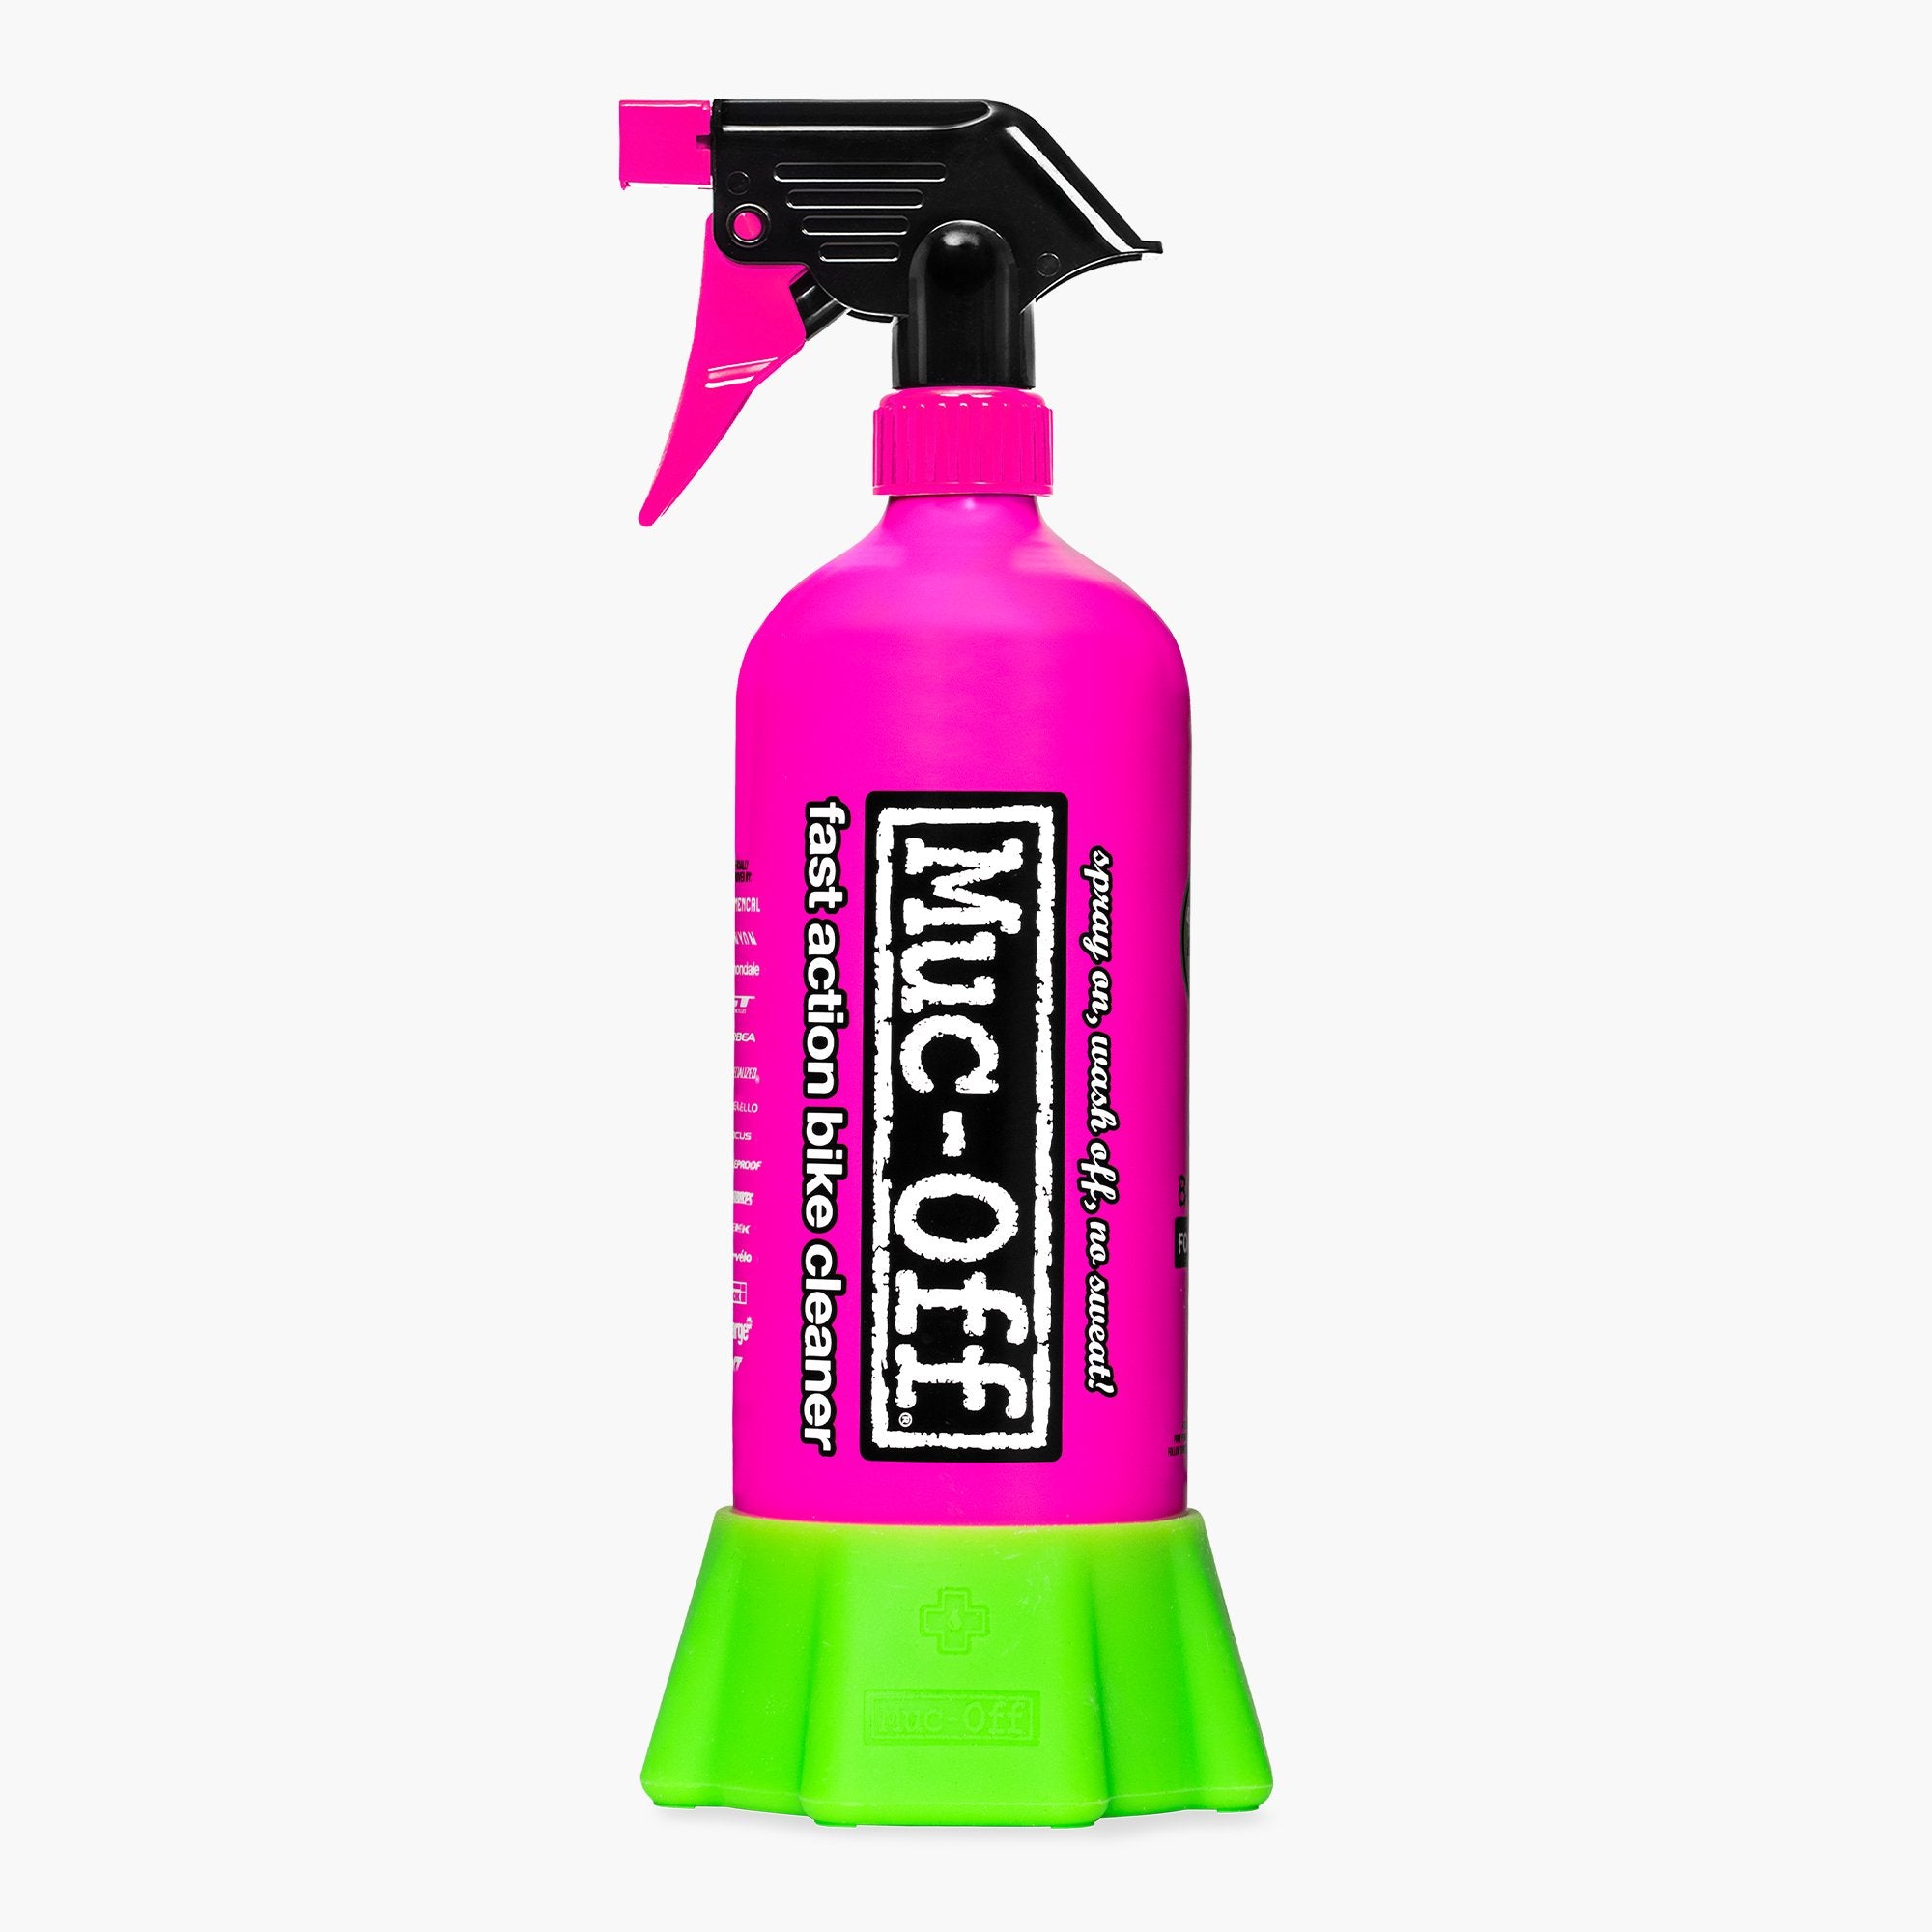 MUC-OFF USA Ultimate Motorcycle Cleaning Kit - Discount Moto Gear